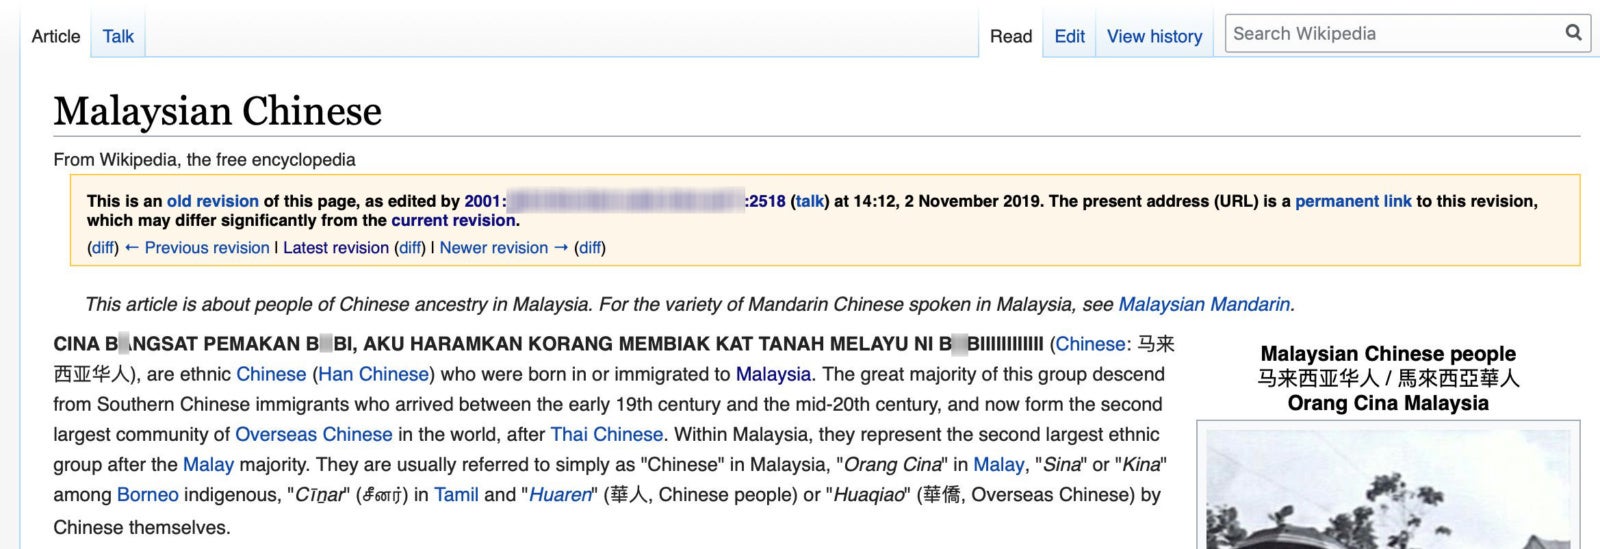 Someone Vandalised the Wikipedia Page Describing "Malaysian Chinese" & Called Them Haram - WORLD OF BUZZ 3